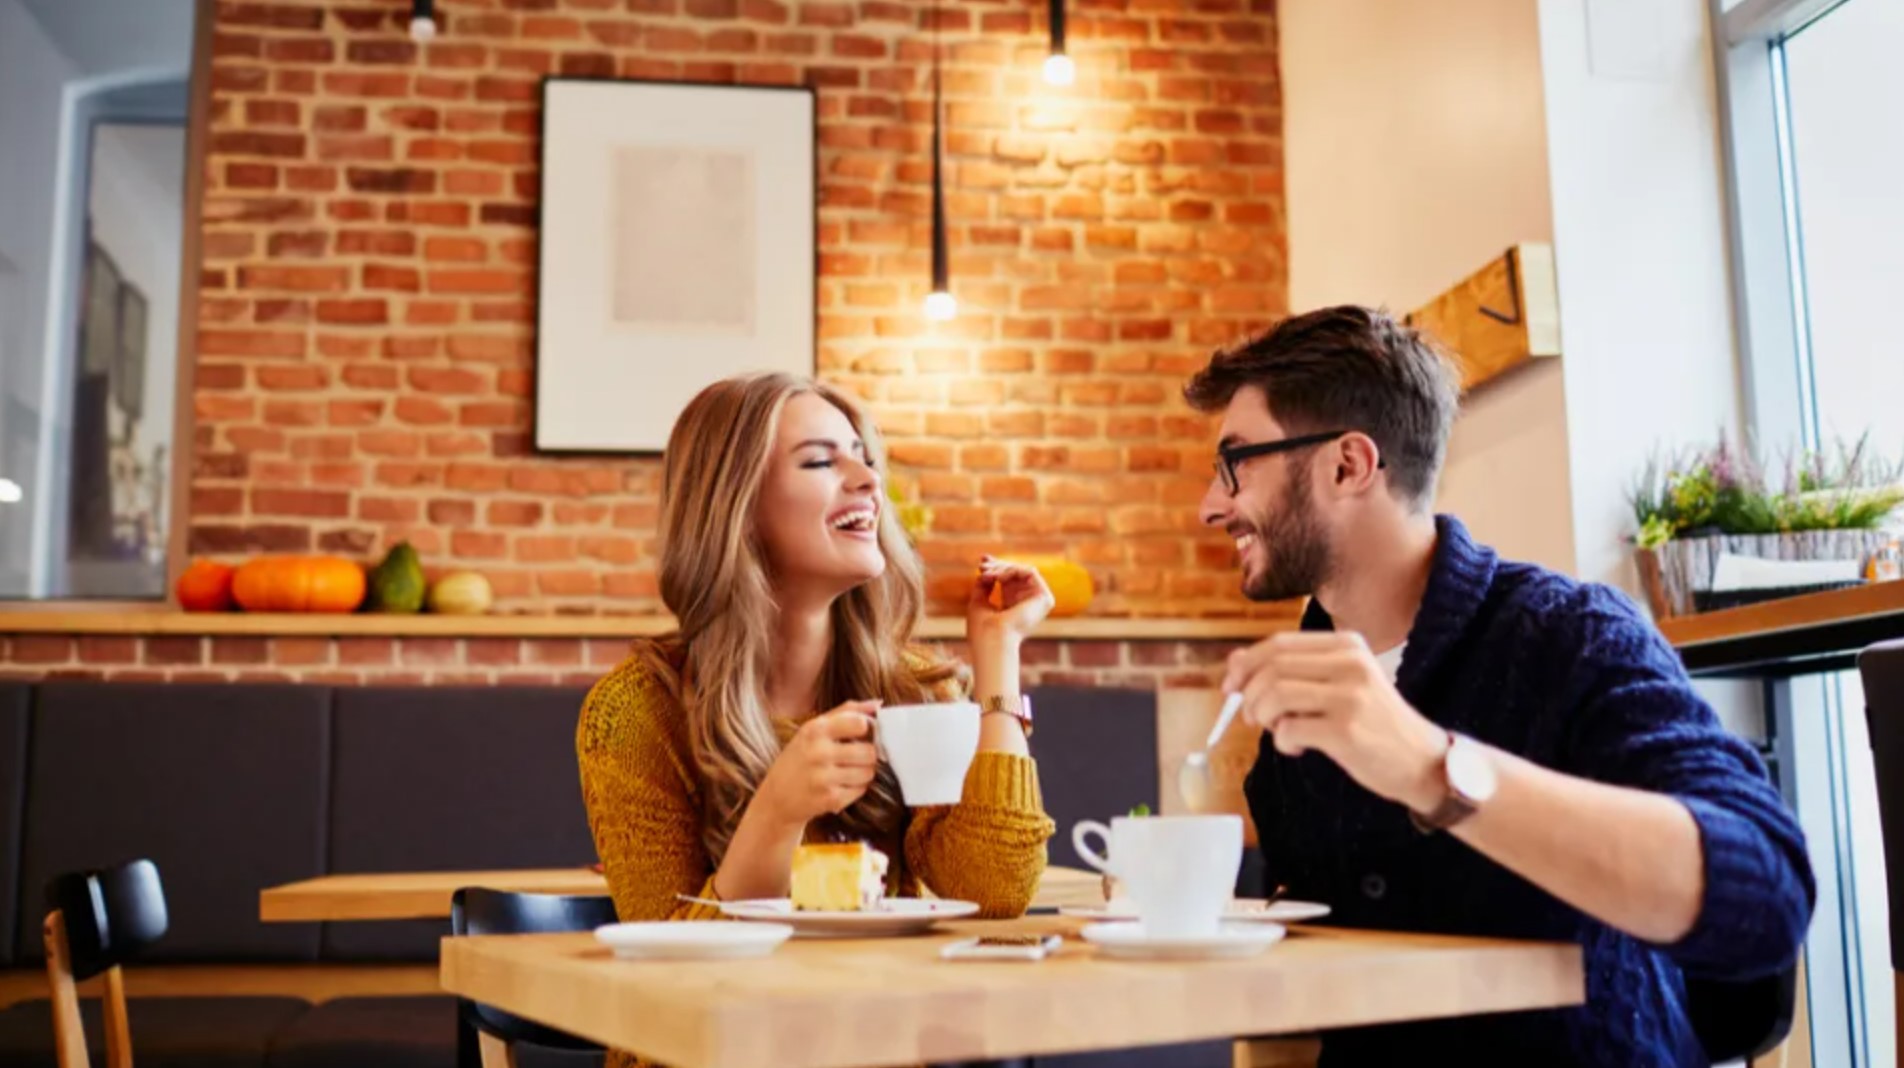 How to Deal With Nerves on a First Date